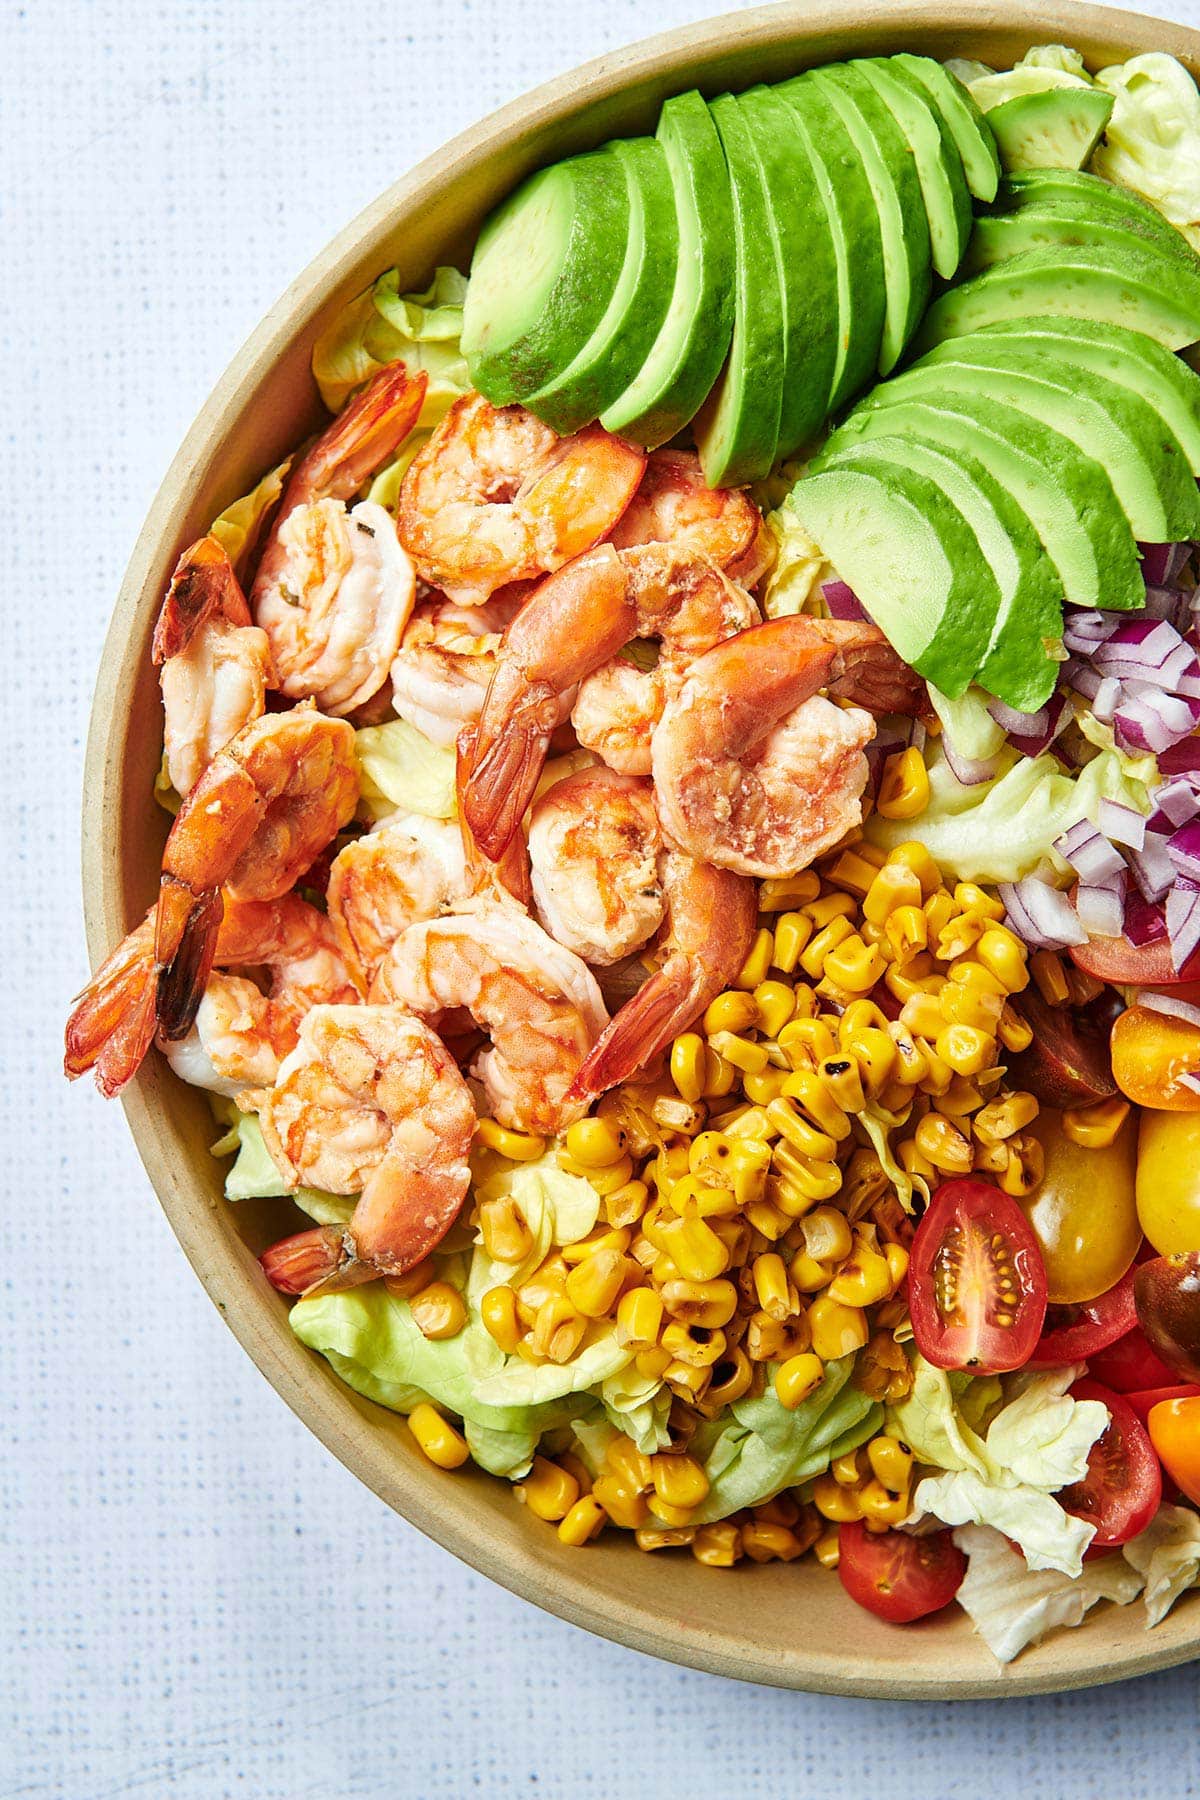 Grilled Shrimp Salad with avocado and grilled corn in brown bowl.